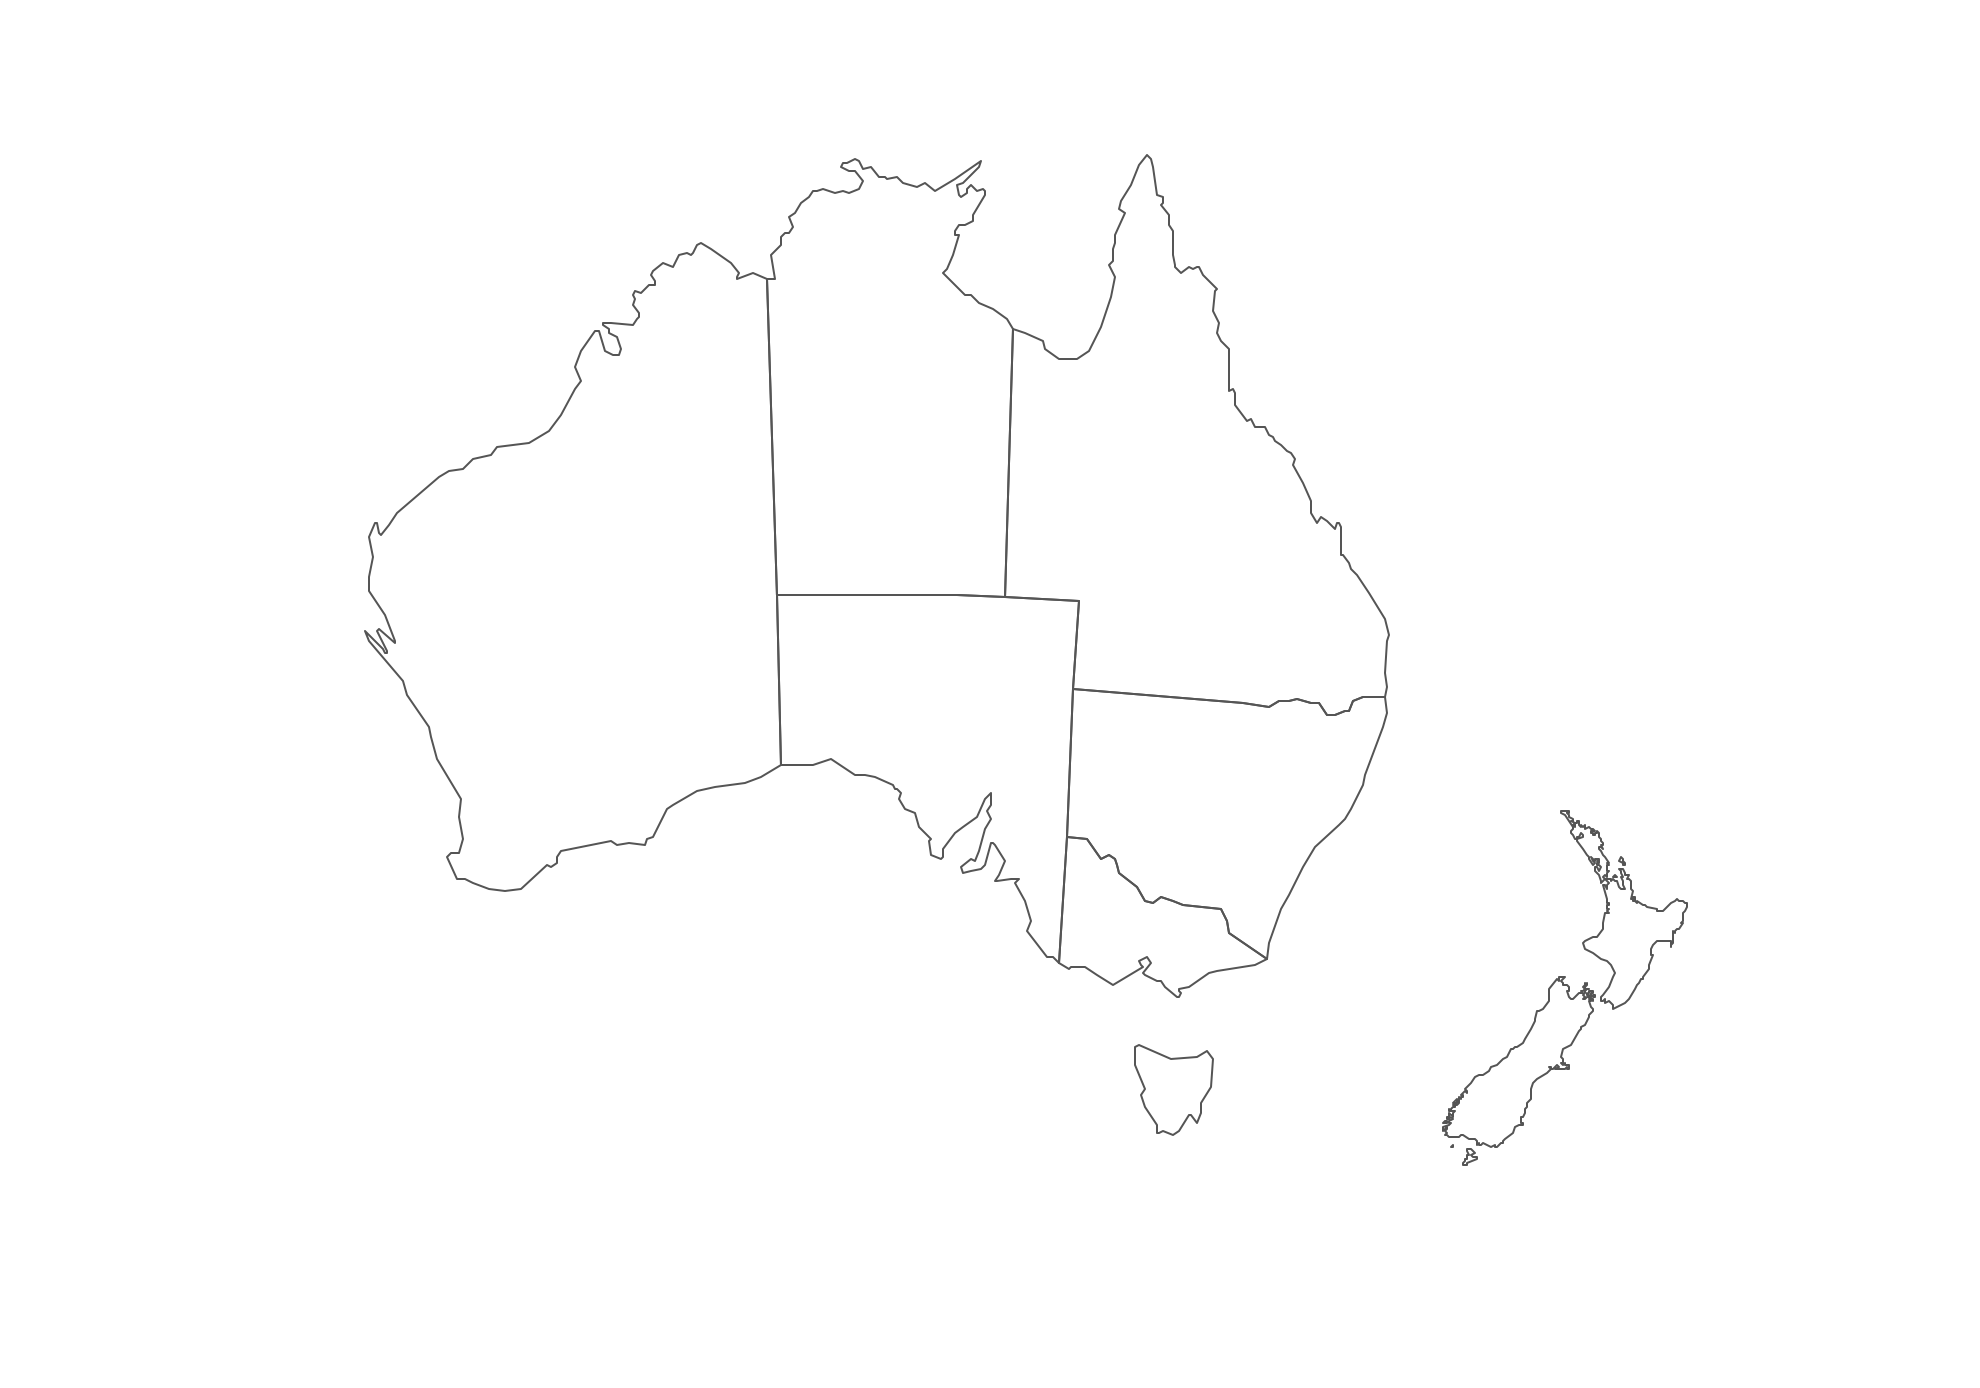 map of australia and new zealand outline Geo Map Australia New Zealand map of australia and new zealand outline